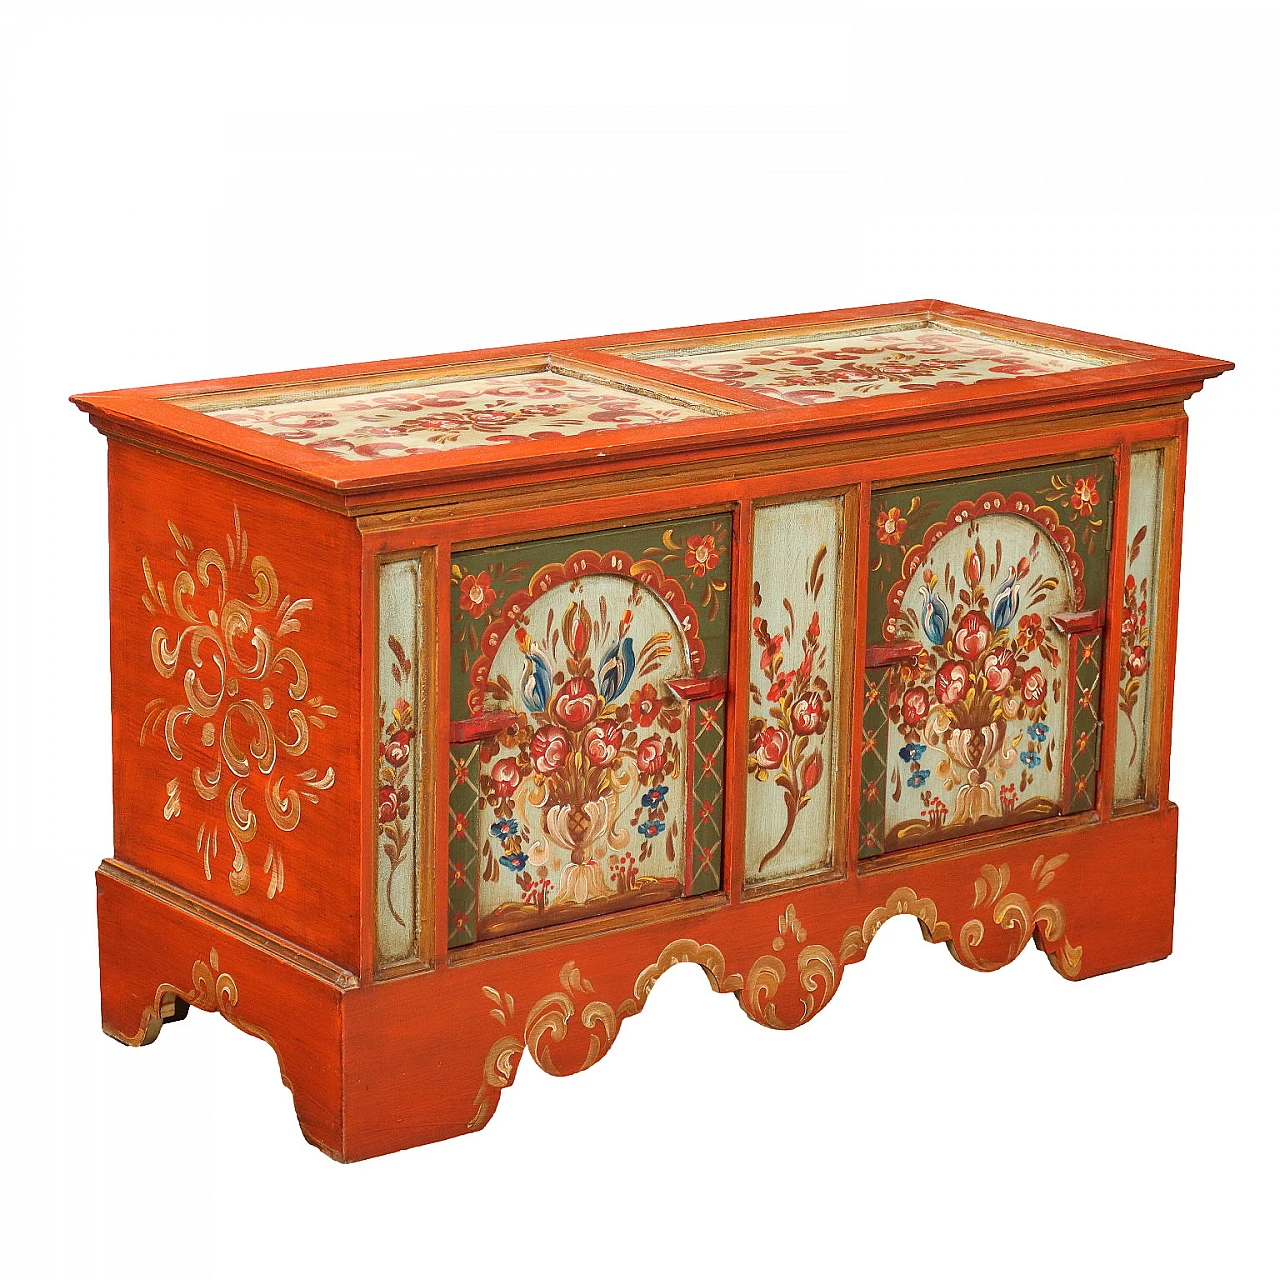 2 Doors wooden sideboard decorated with floral motifs 1